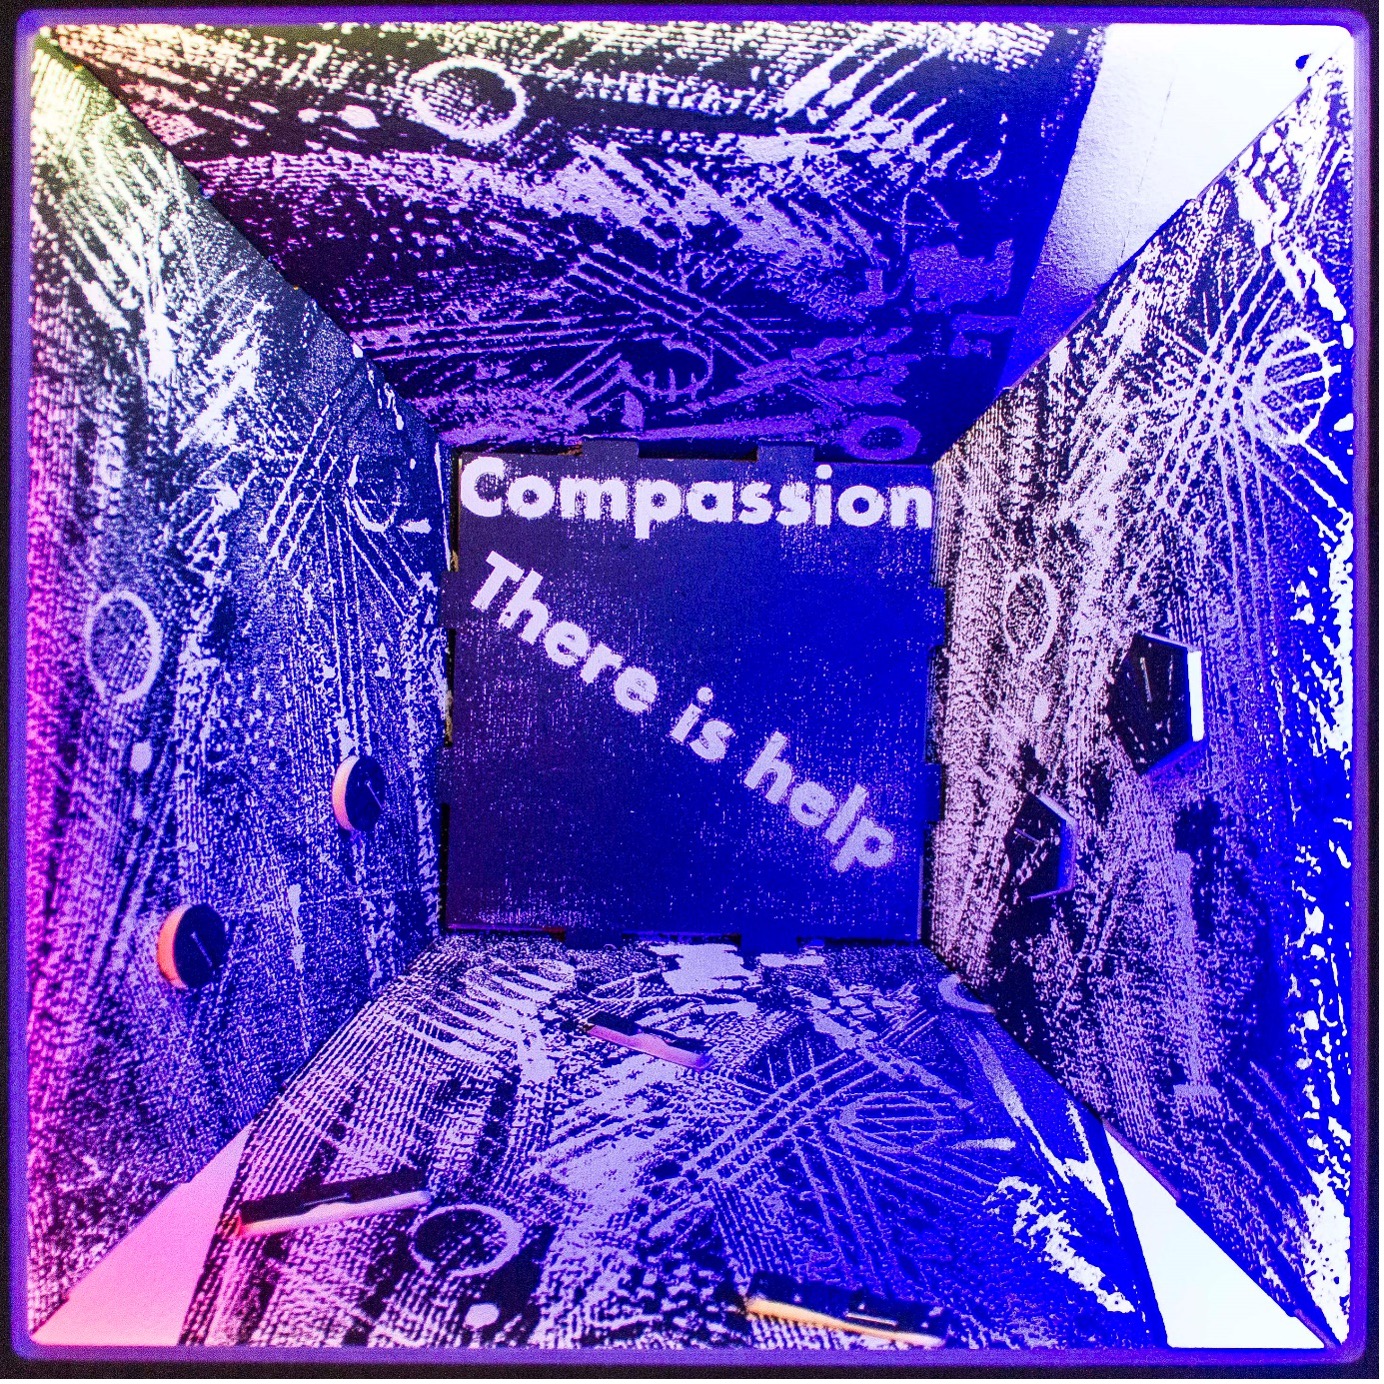 An art project with words including compassion and there is help